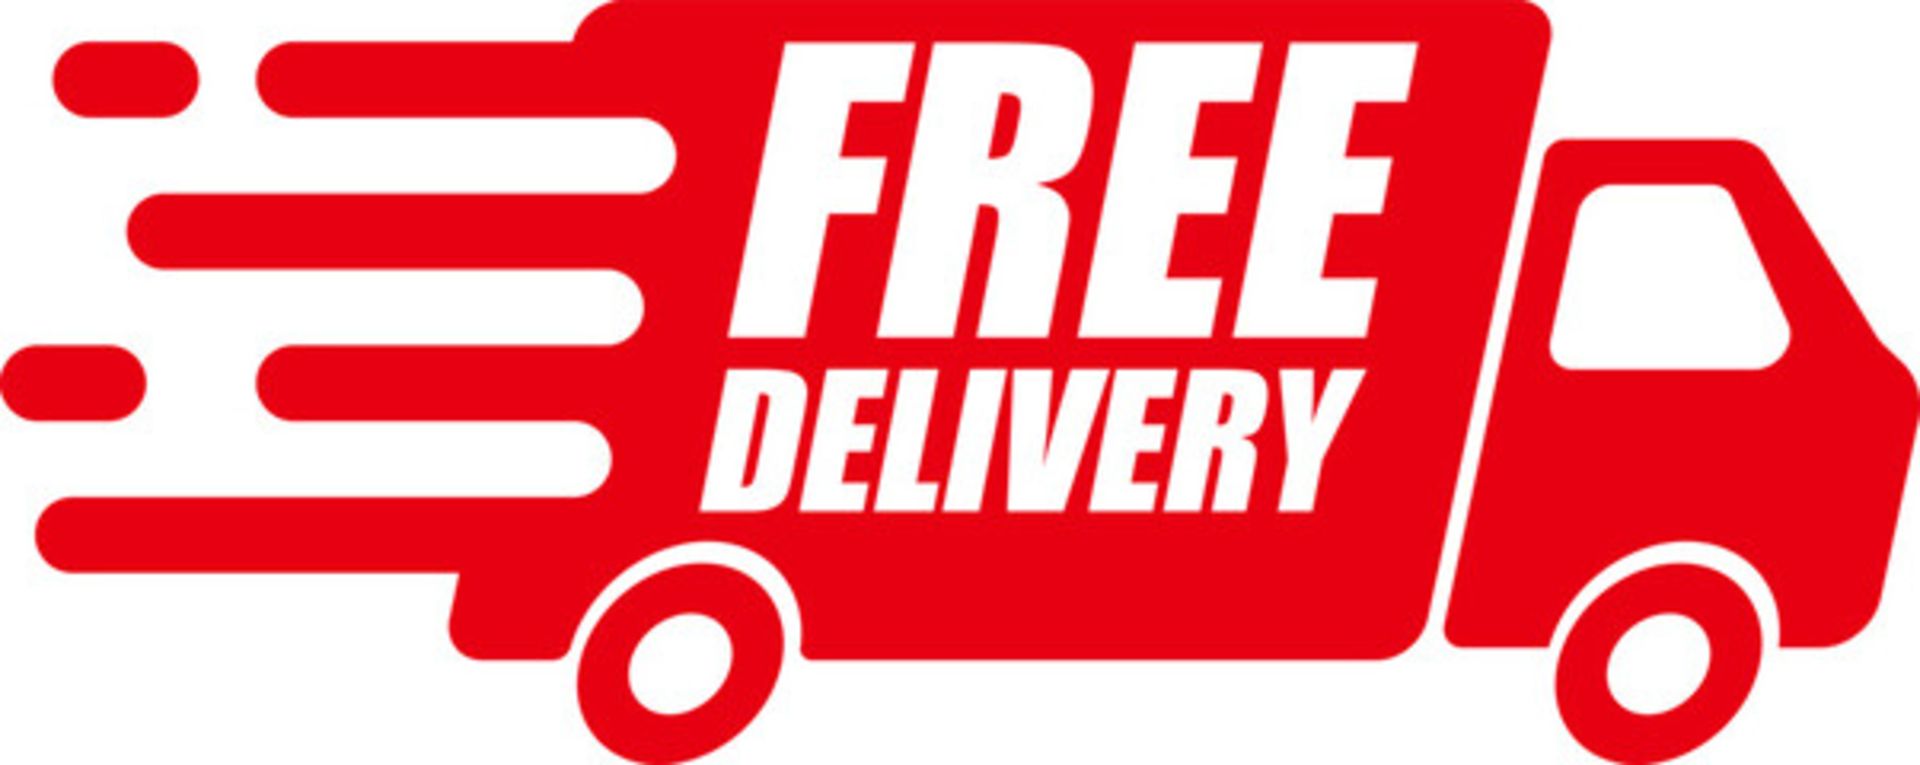 FREE DELIVERY.